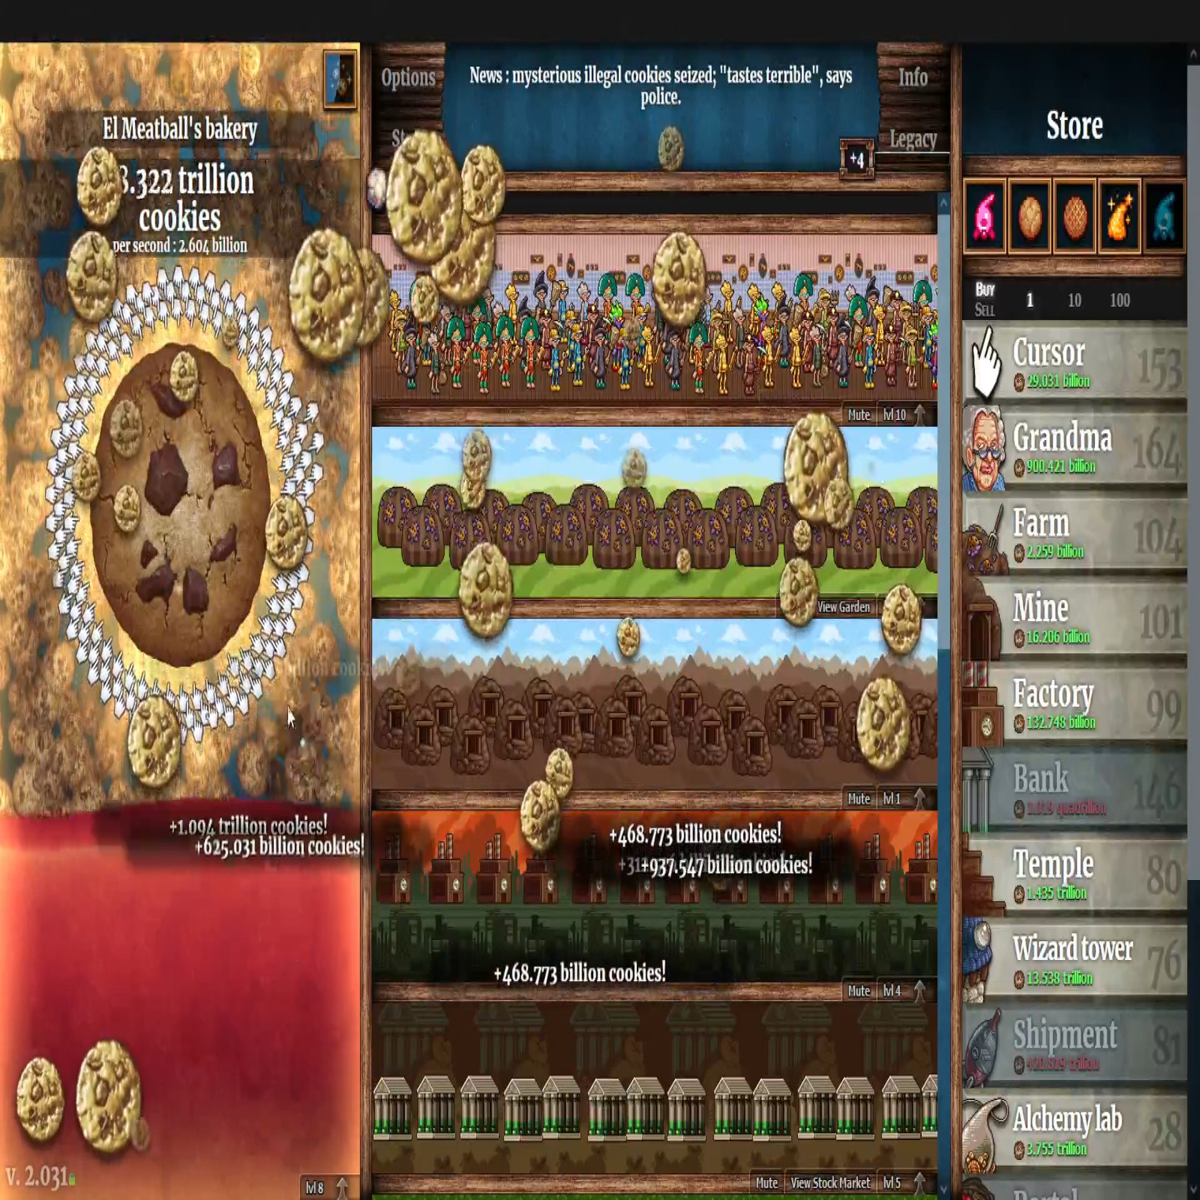 Cookie Clicker Steam Version Teases C418 Soundtrack, 600+ Upgrades